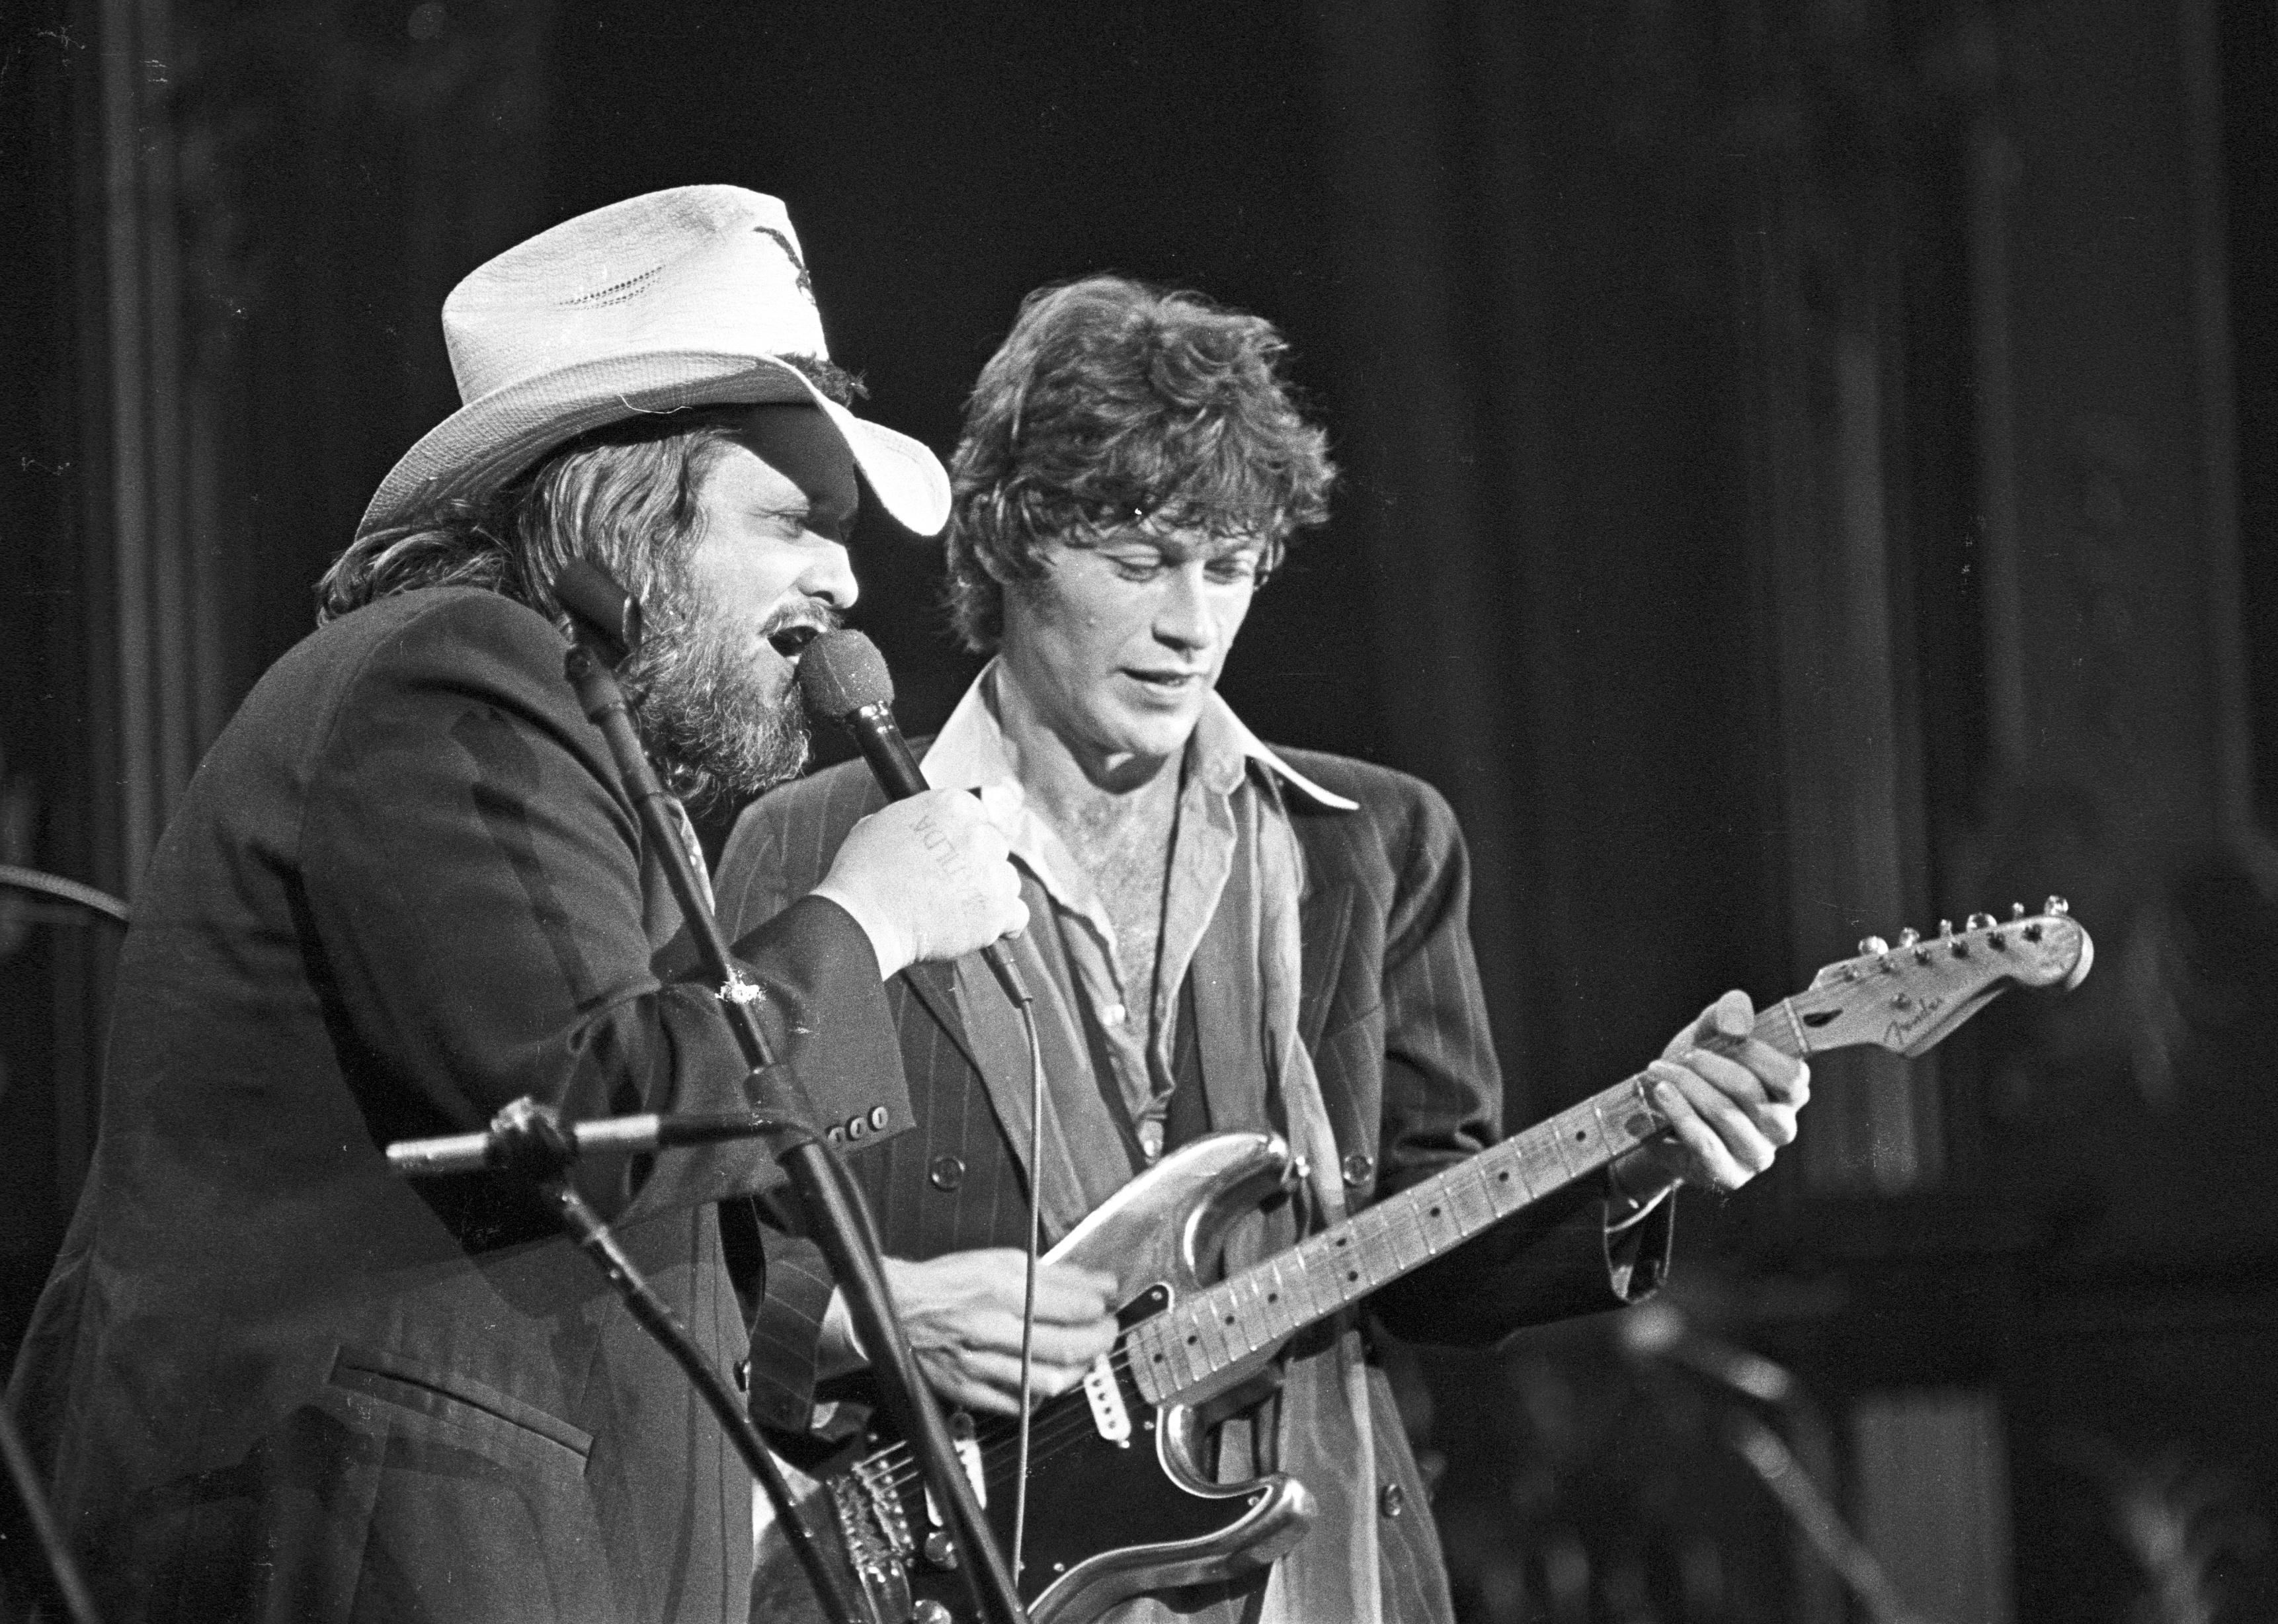 Musicians Ronnie Hawkins and Robbie Robertson perform on stage at The Band